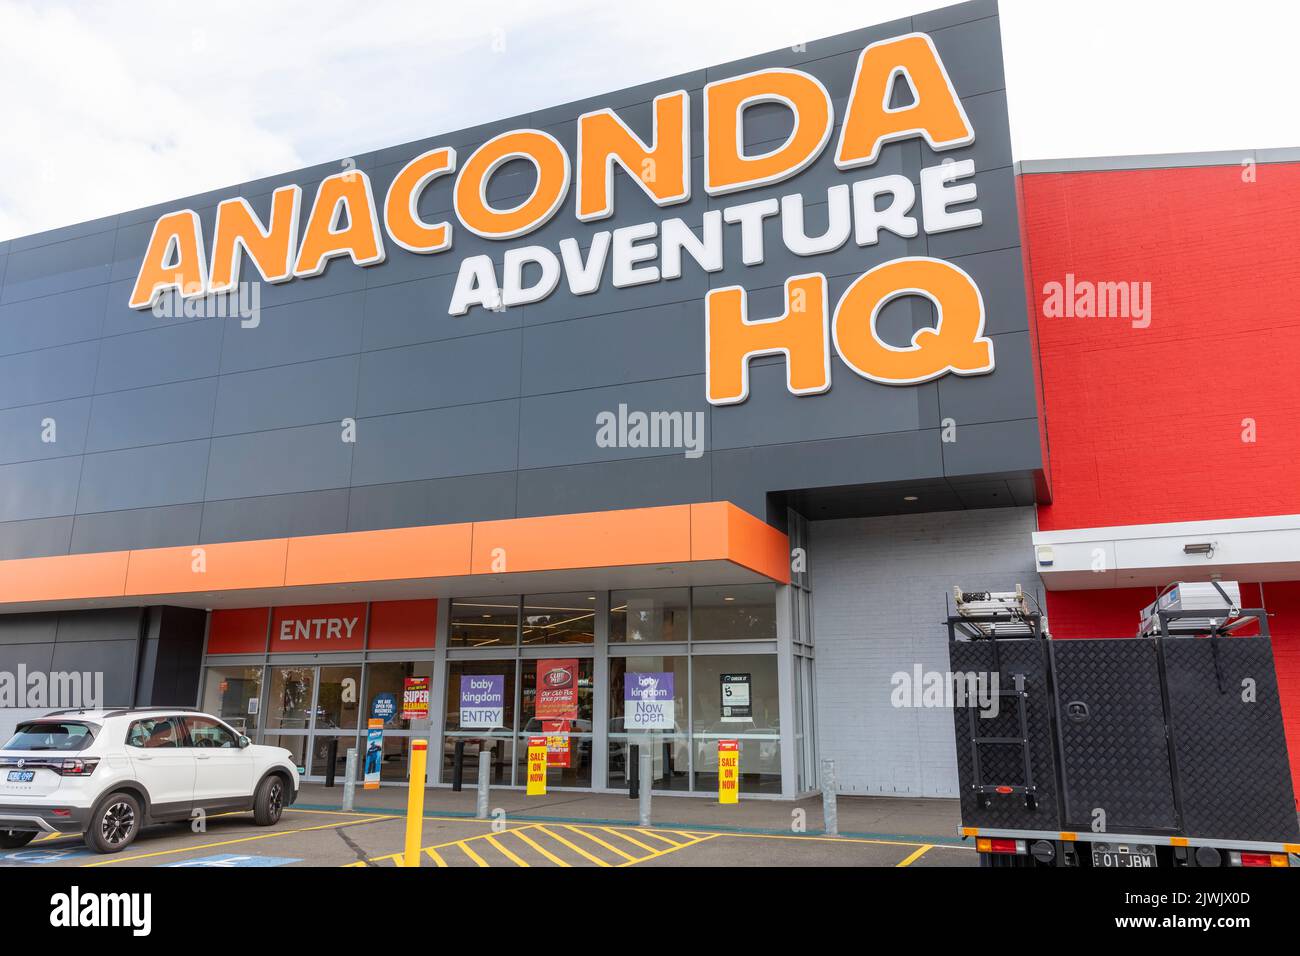 Anaconda Adventure store in Chullora Sydney, selling equipment for camping, fishing,boating and caravan trips, NSW,Australia Stock Photo